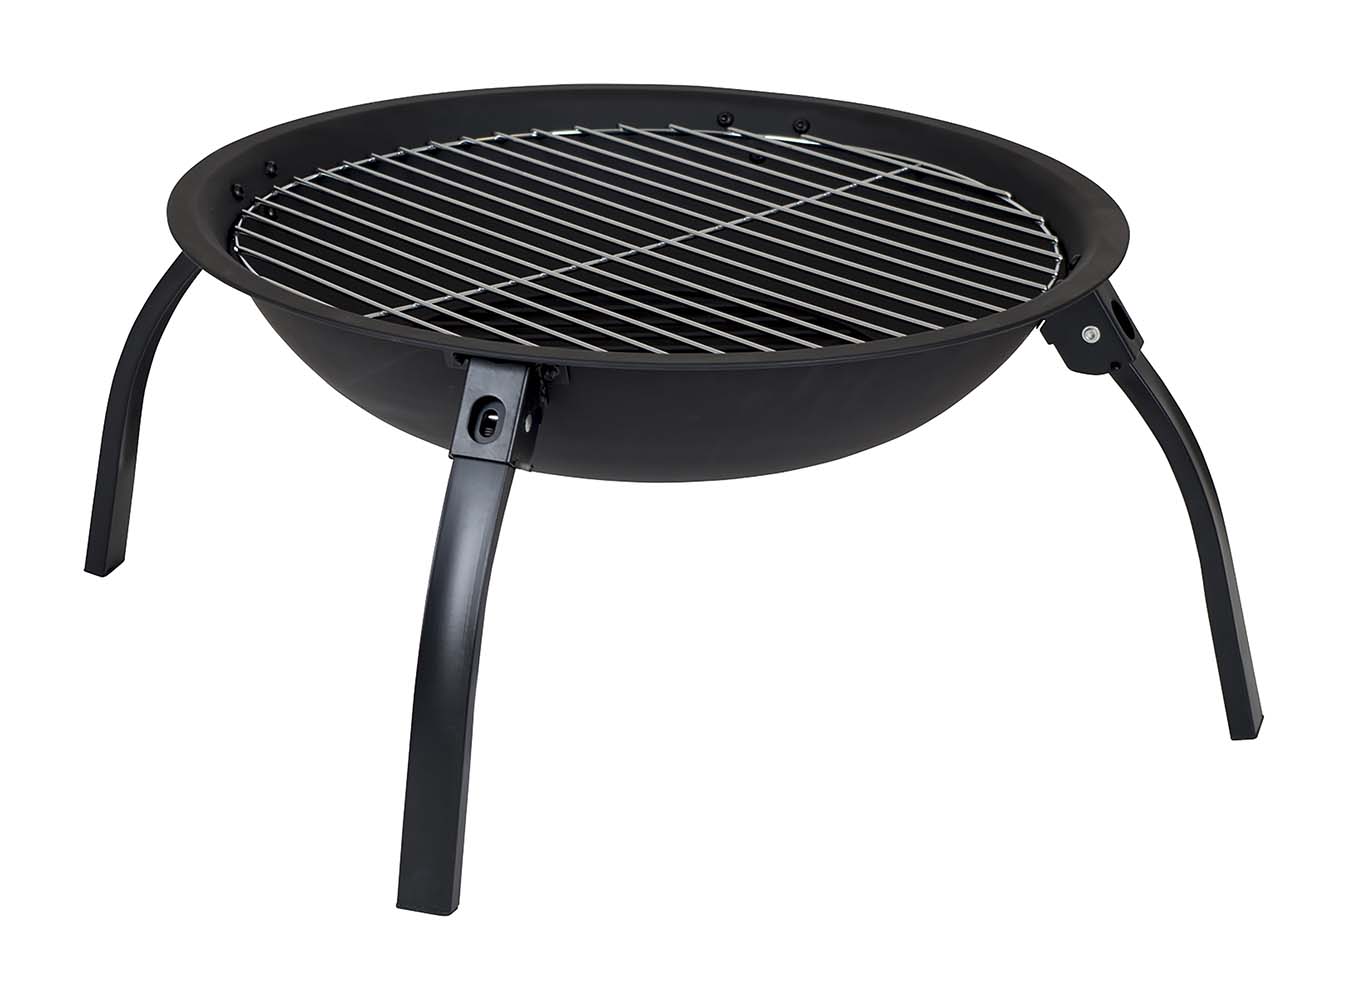 8108500 A traditional fire bowl and barbecue in one. You can make a fire in this very sturdy bowl. The grilling grid combined with the fire bowl makes for a great barbecue. Thanks to the fold-out legs, the fire bowl is easy to carry and store.